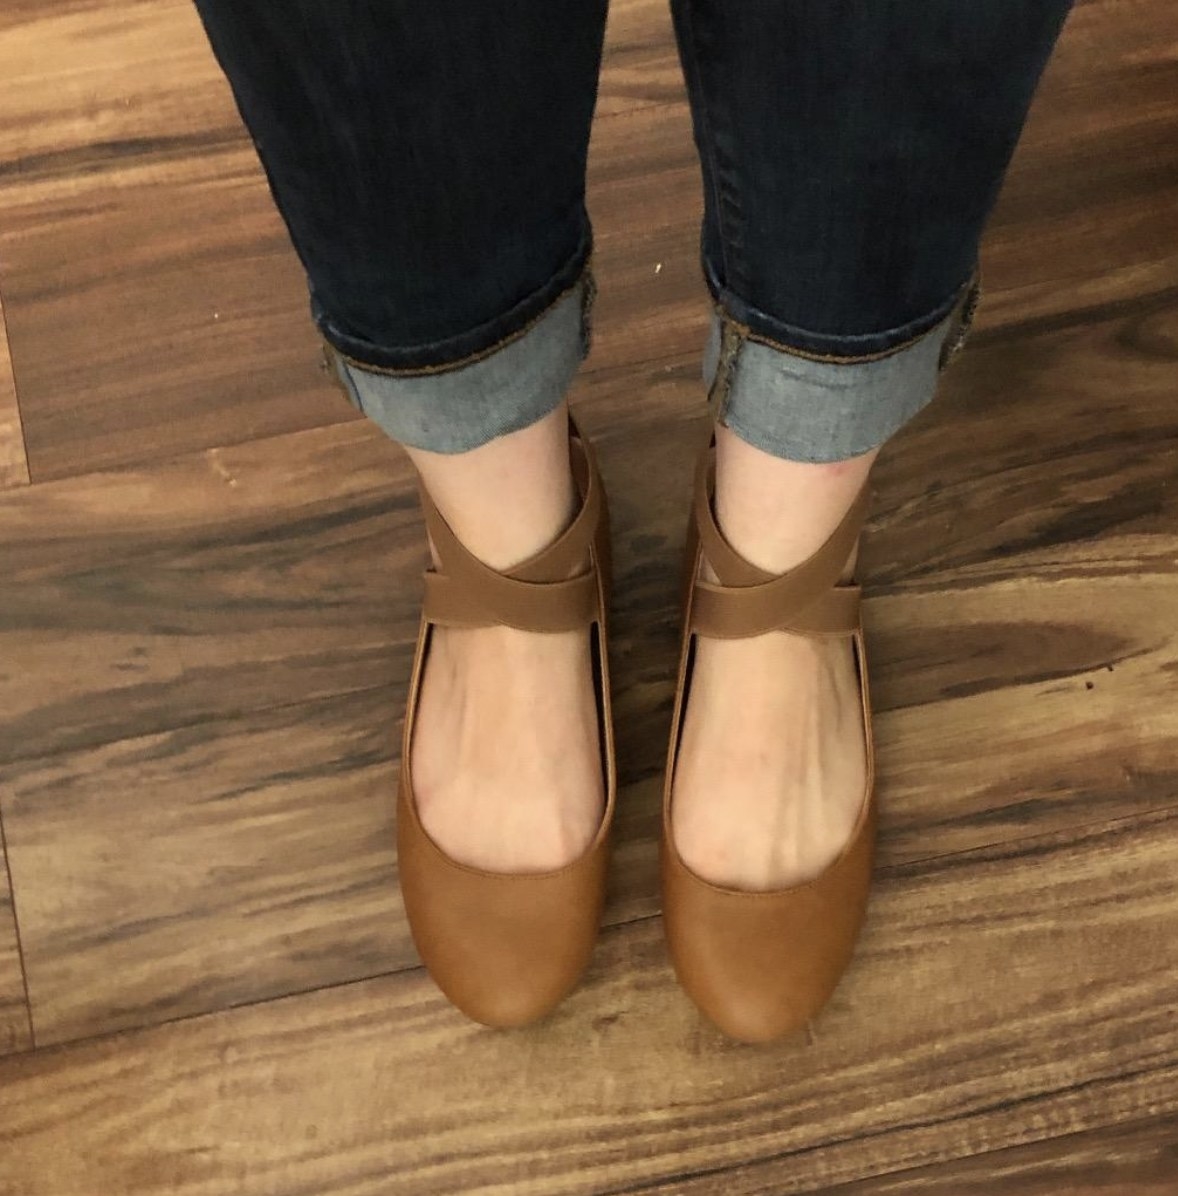 Tan ballet flats with straps on the around the ankles